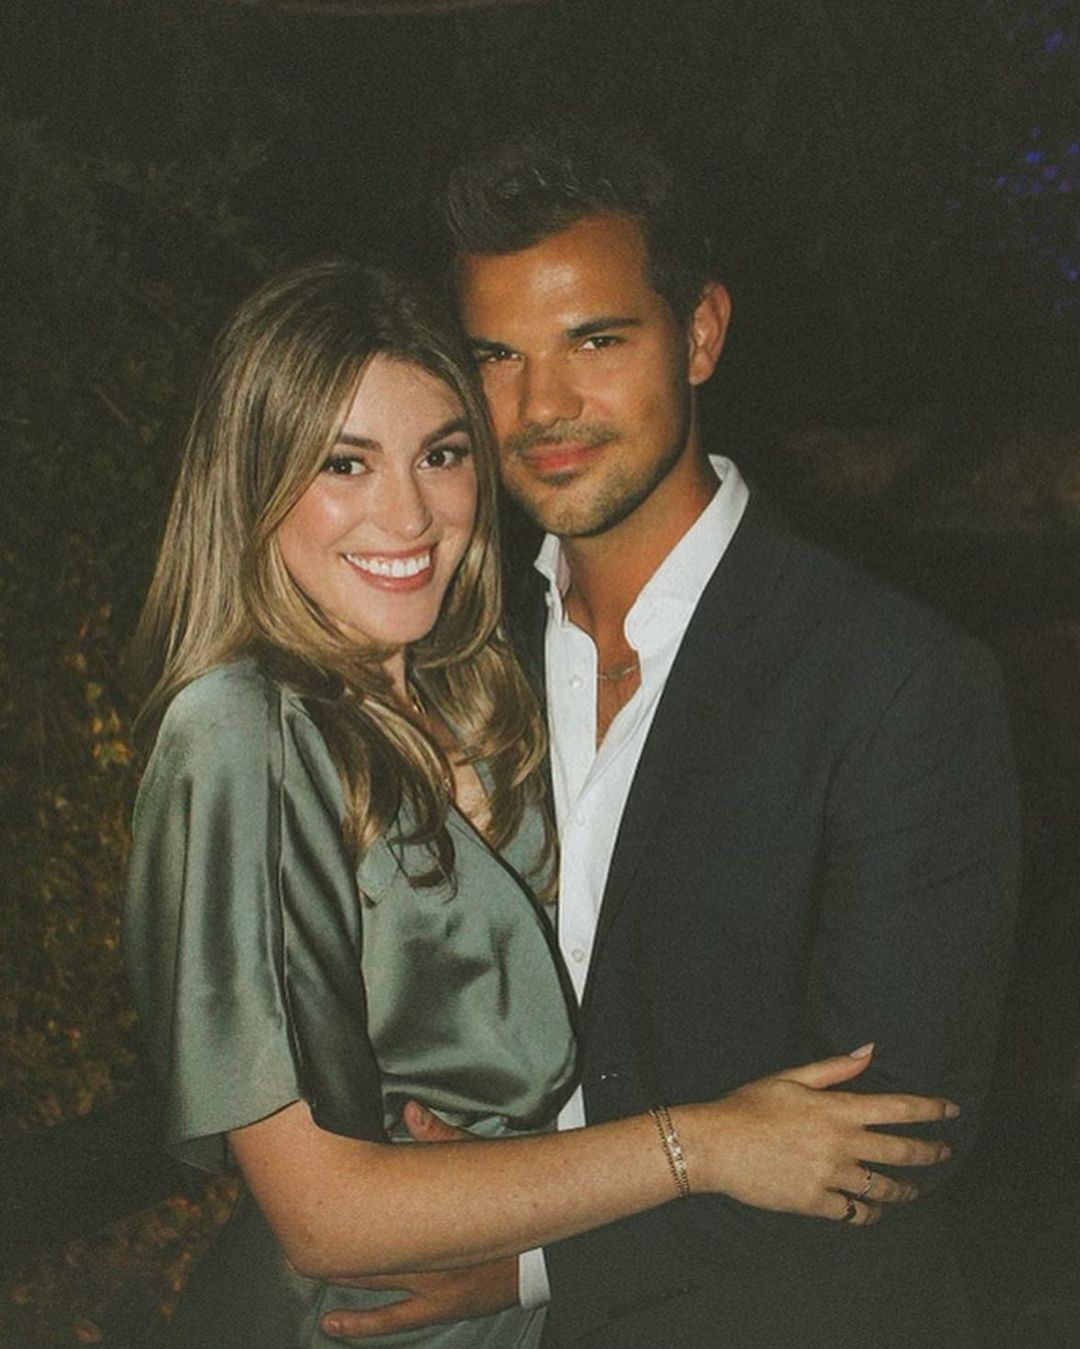 Taylor Lautner Marries Taylor Dome at California Winery